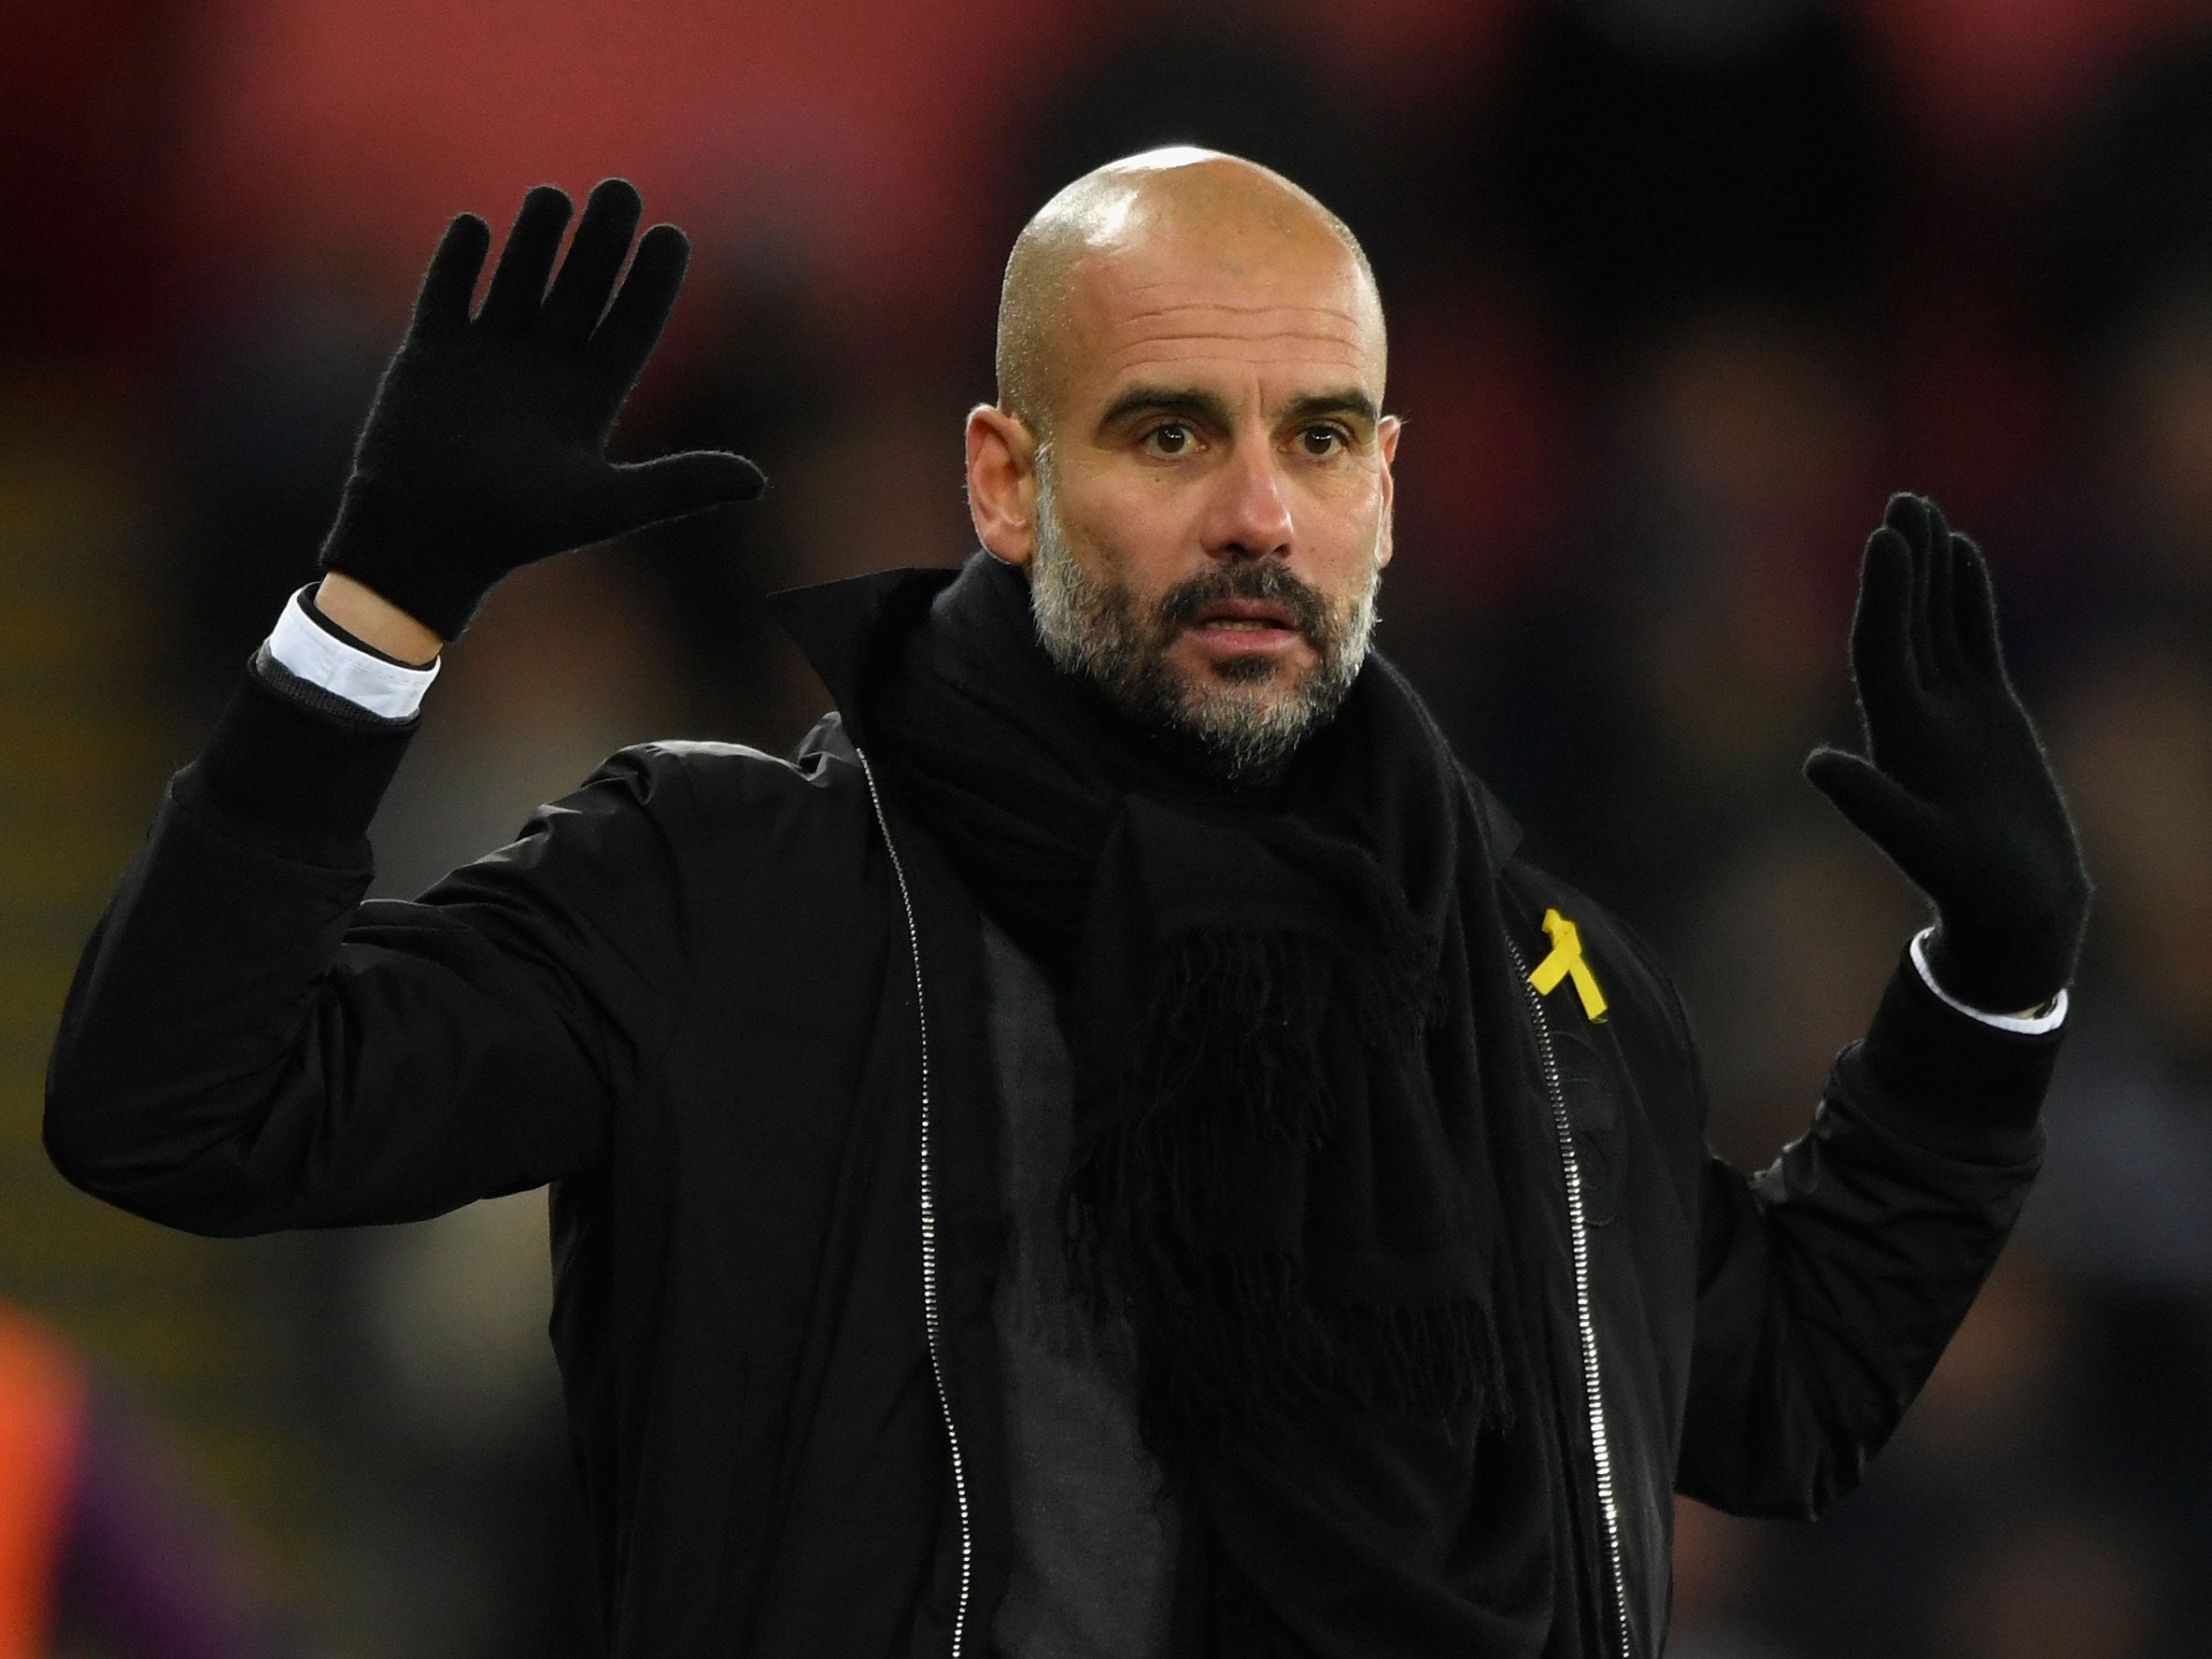 Pep Guardiola denies ever telling his team to foul opponents deliberately